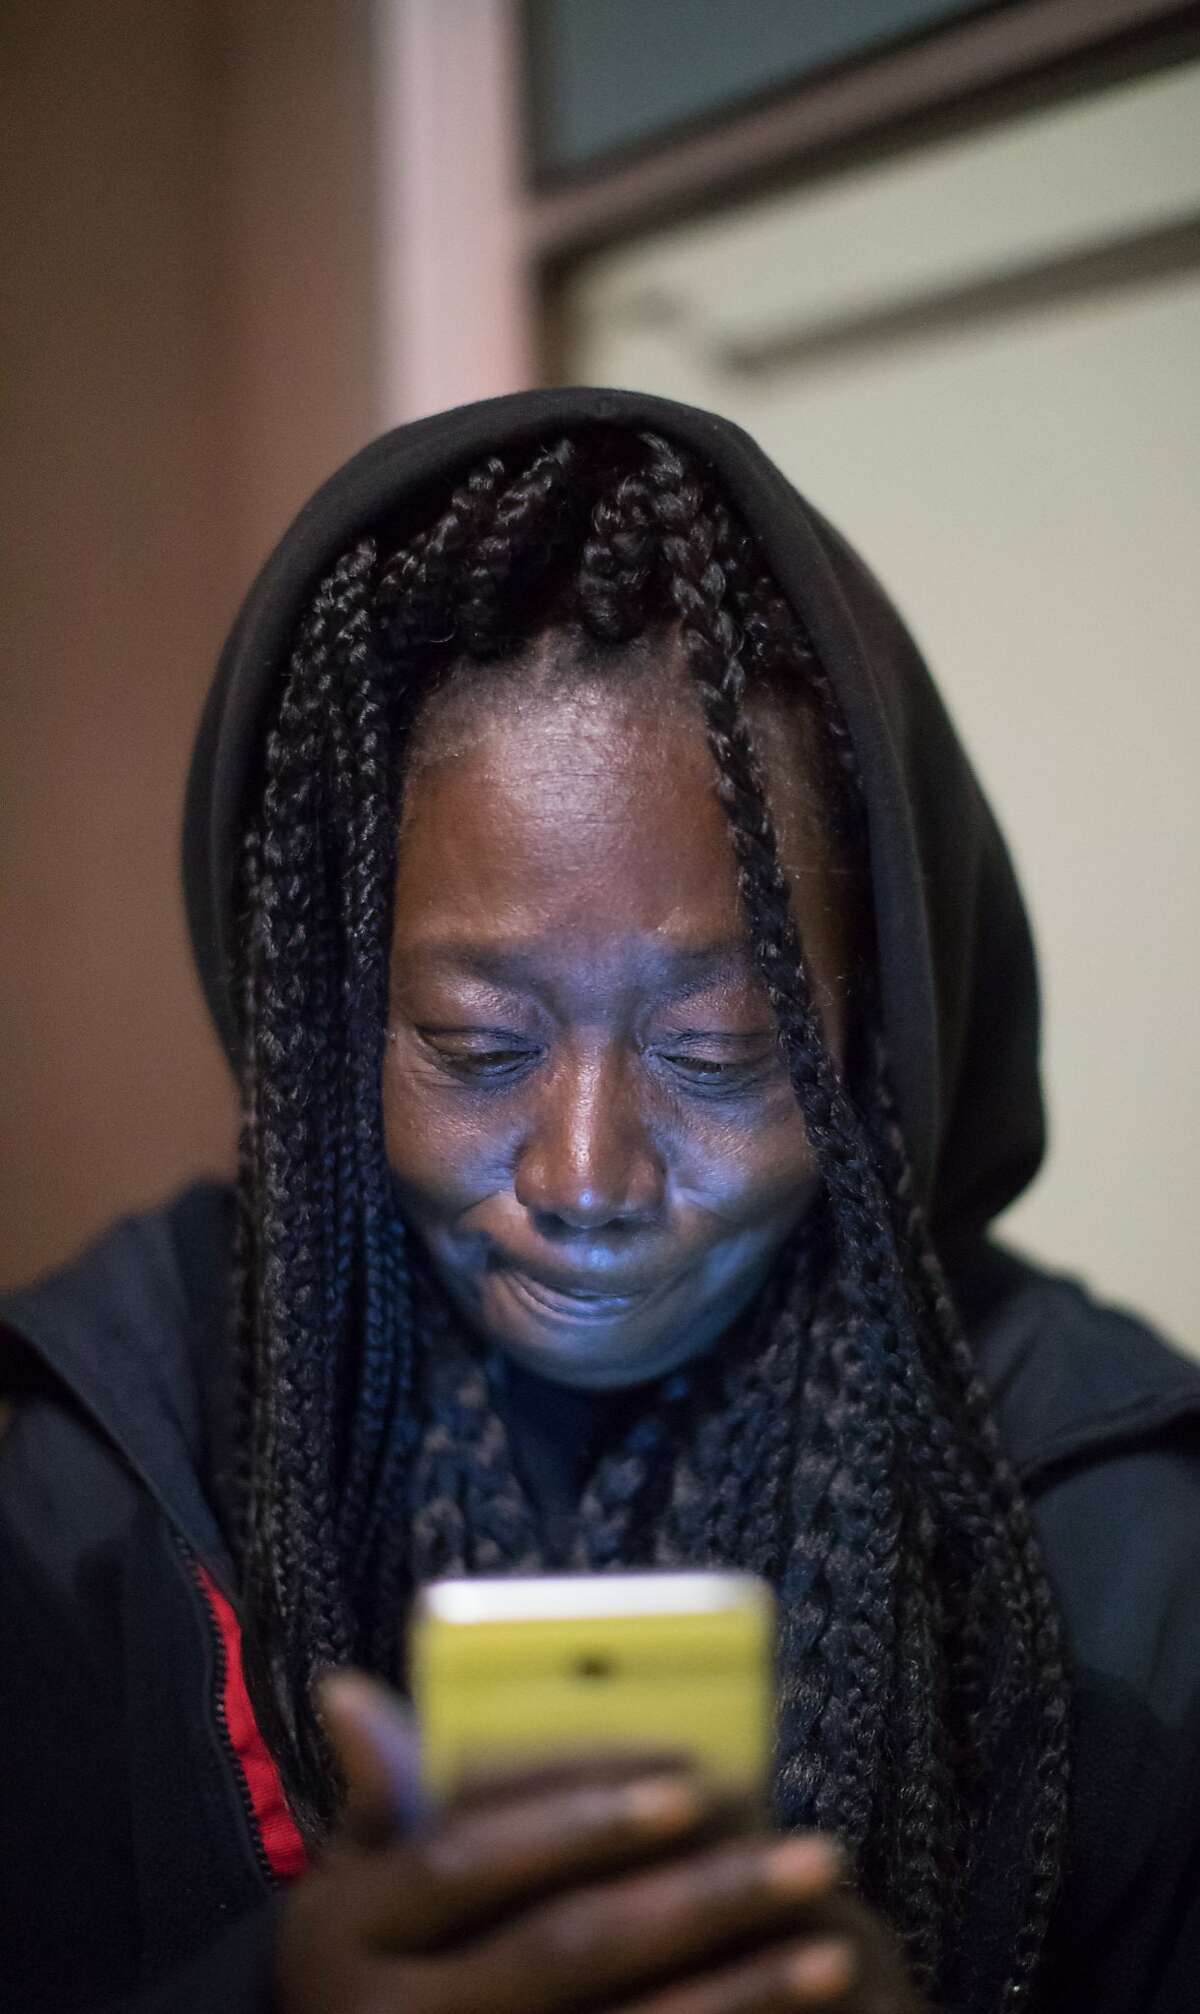 Marie McKinzie looks at her phone before going to sleep on Thursday, Dec. 20, 2018, in Oakland, Calif.